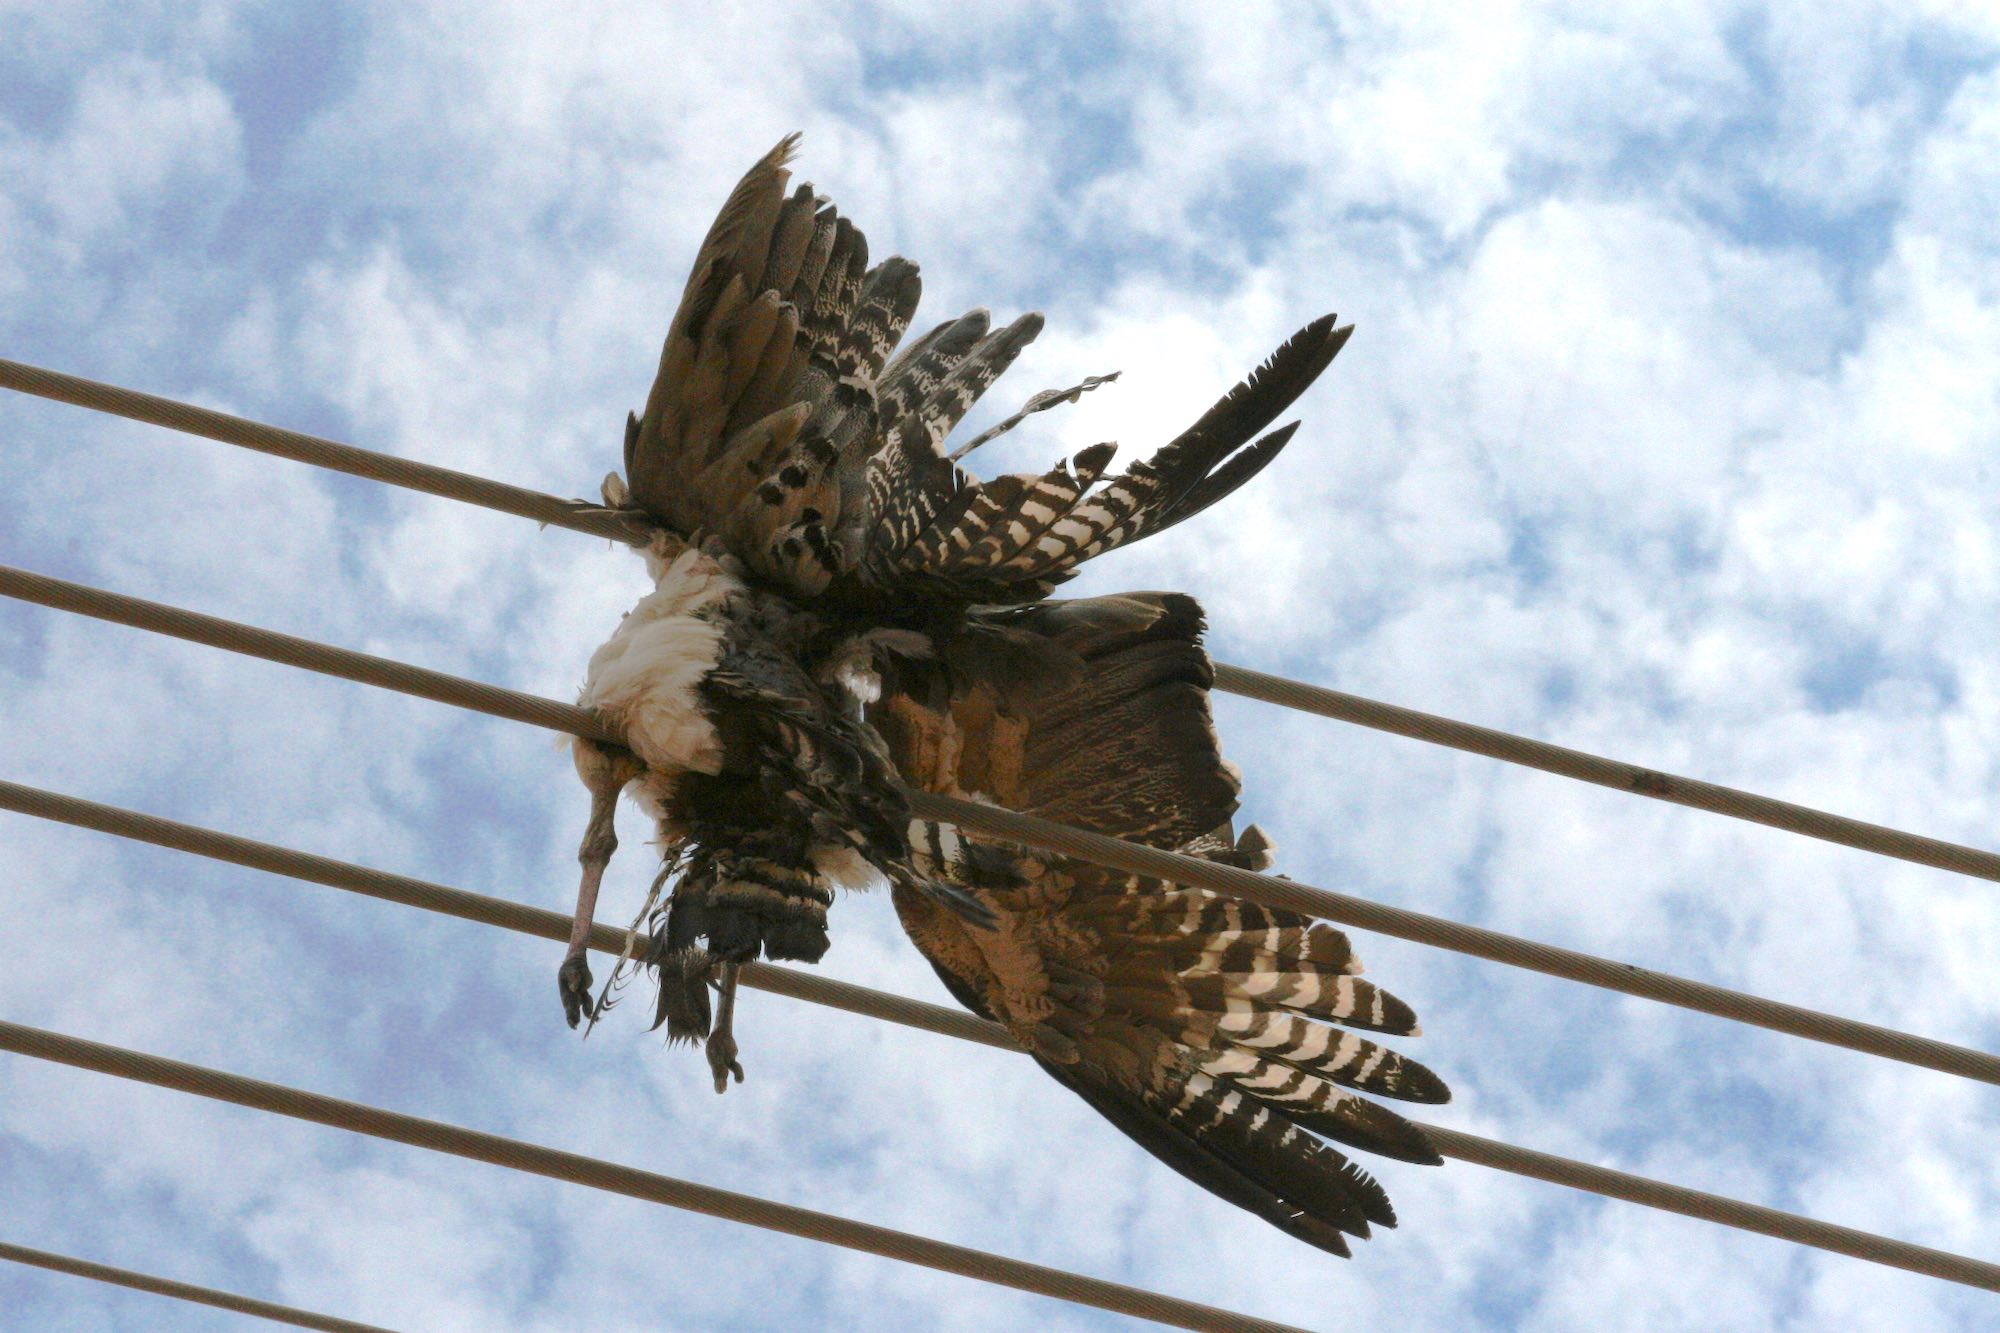 Closeup image of a Kori Bustard killed on impact with powerlines.